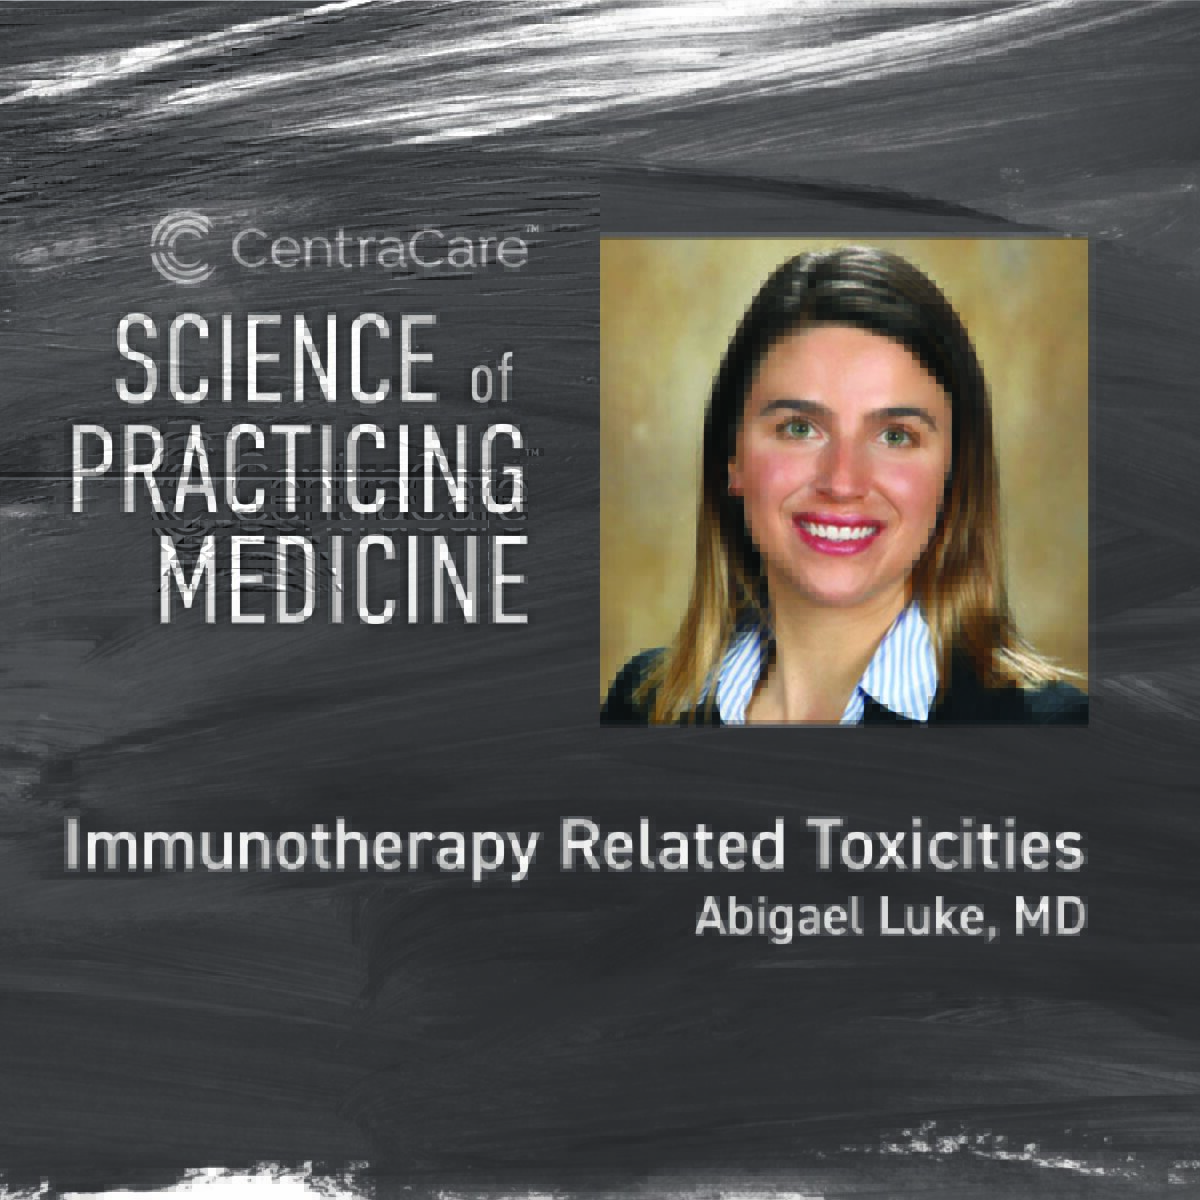 Photo of Abigael Luke, MD for the Science of Practicing Medicine EP13 on Immunotherapy Related Toxicities